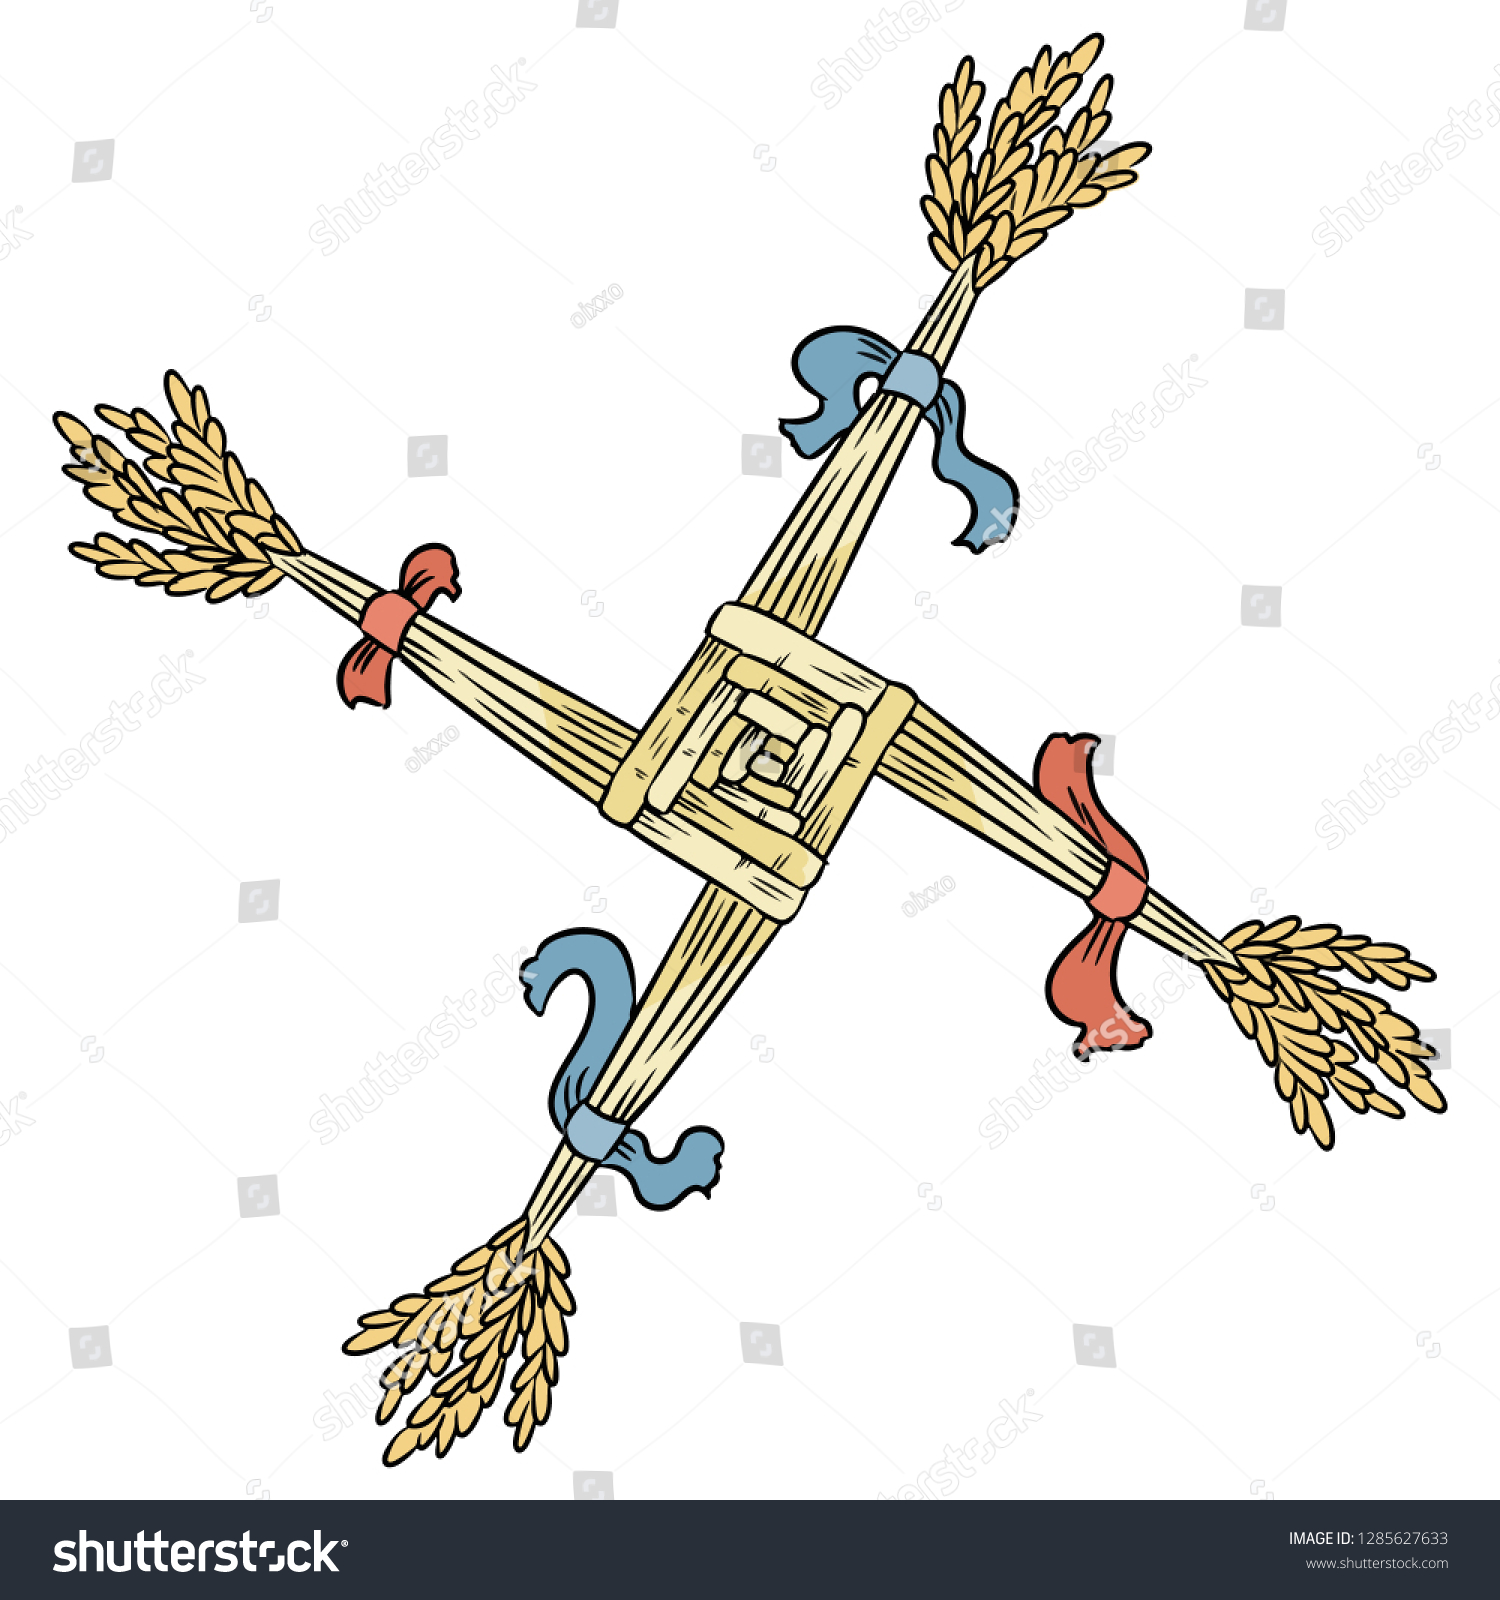 SVG of Brigid's Cross made of straw. Wiccan Imbolc pagan symbol isolated element svg